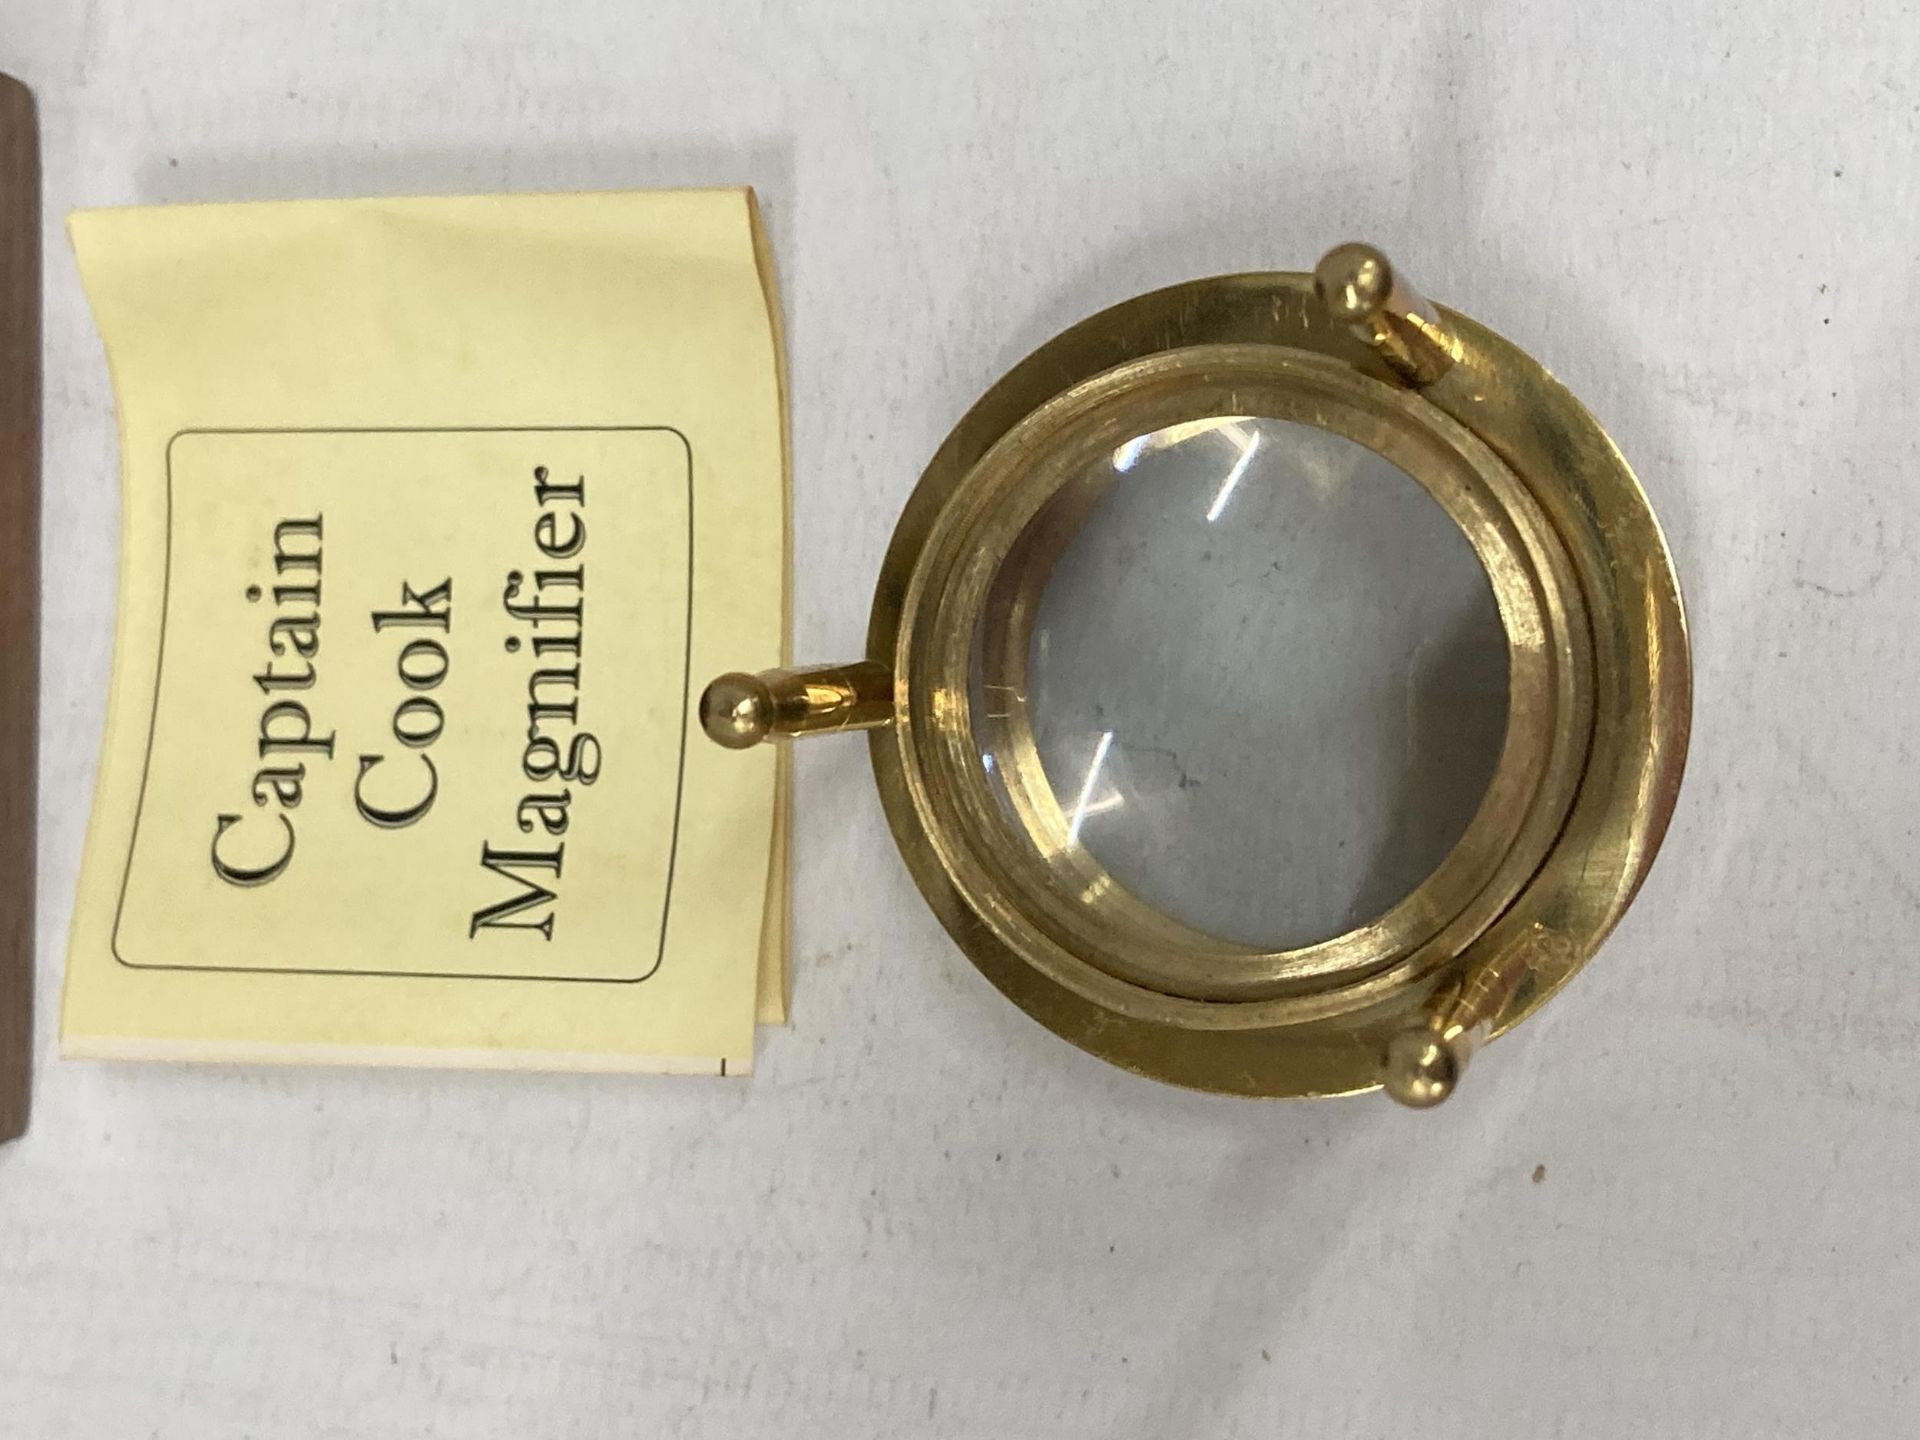 A 'CAPTAIN COOK' BRASS MAGNIFYING GLASS IN A WOODEN BOX - Image 3 of 4